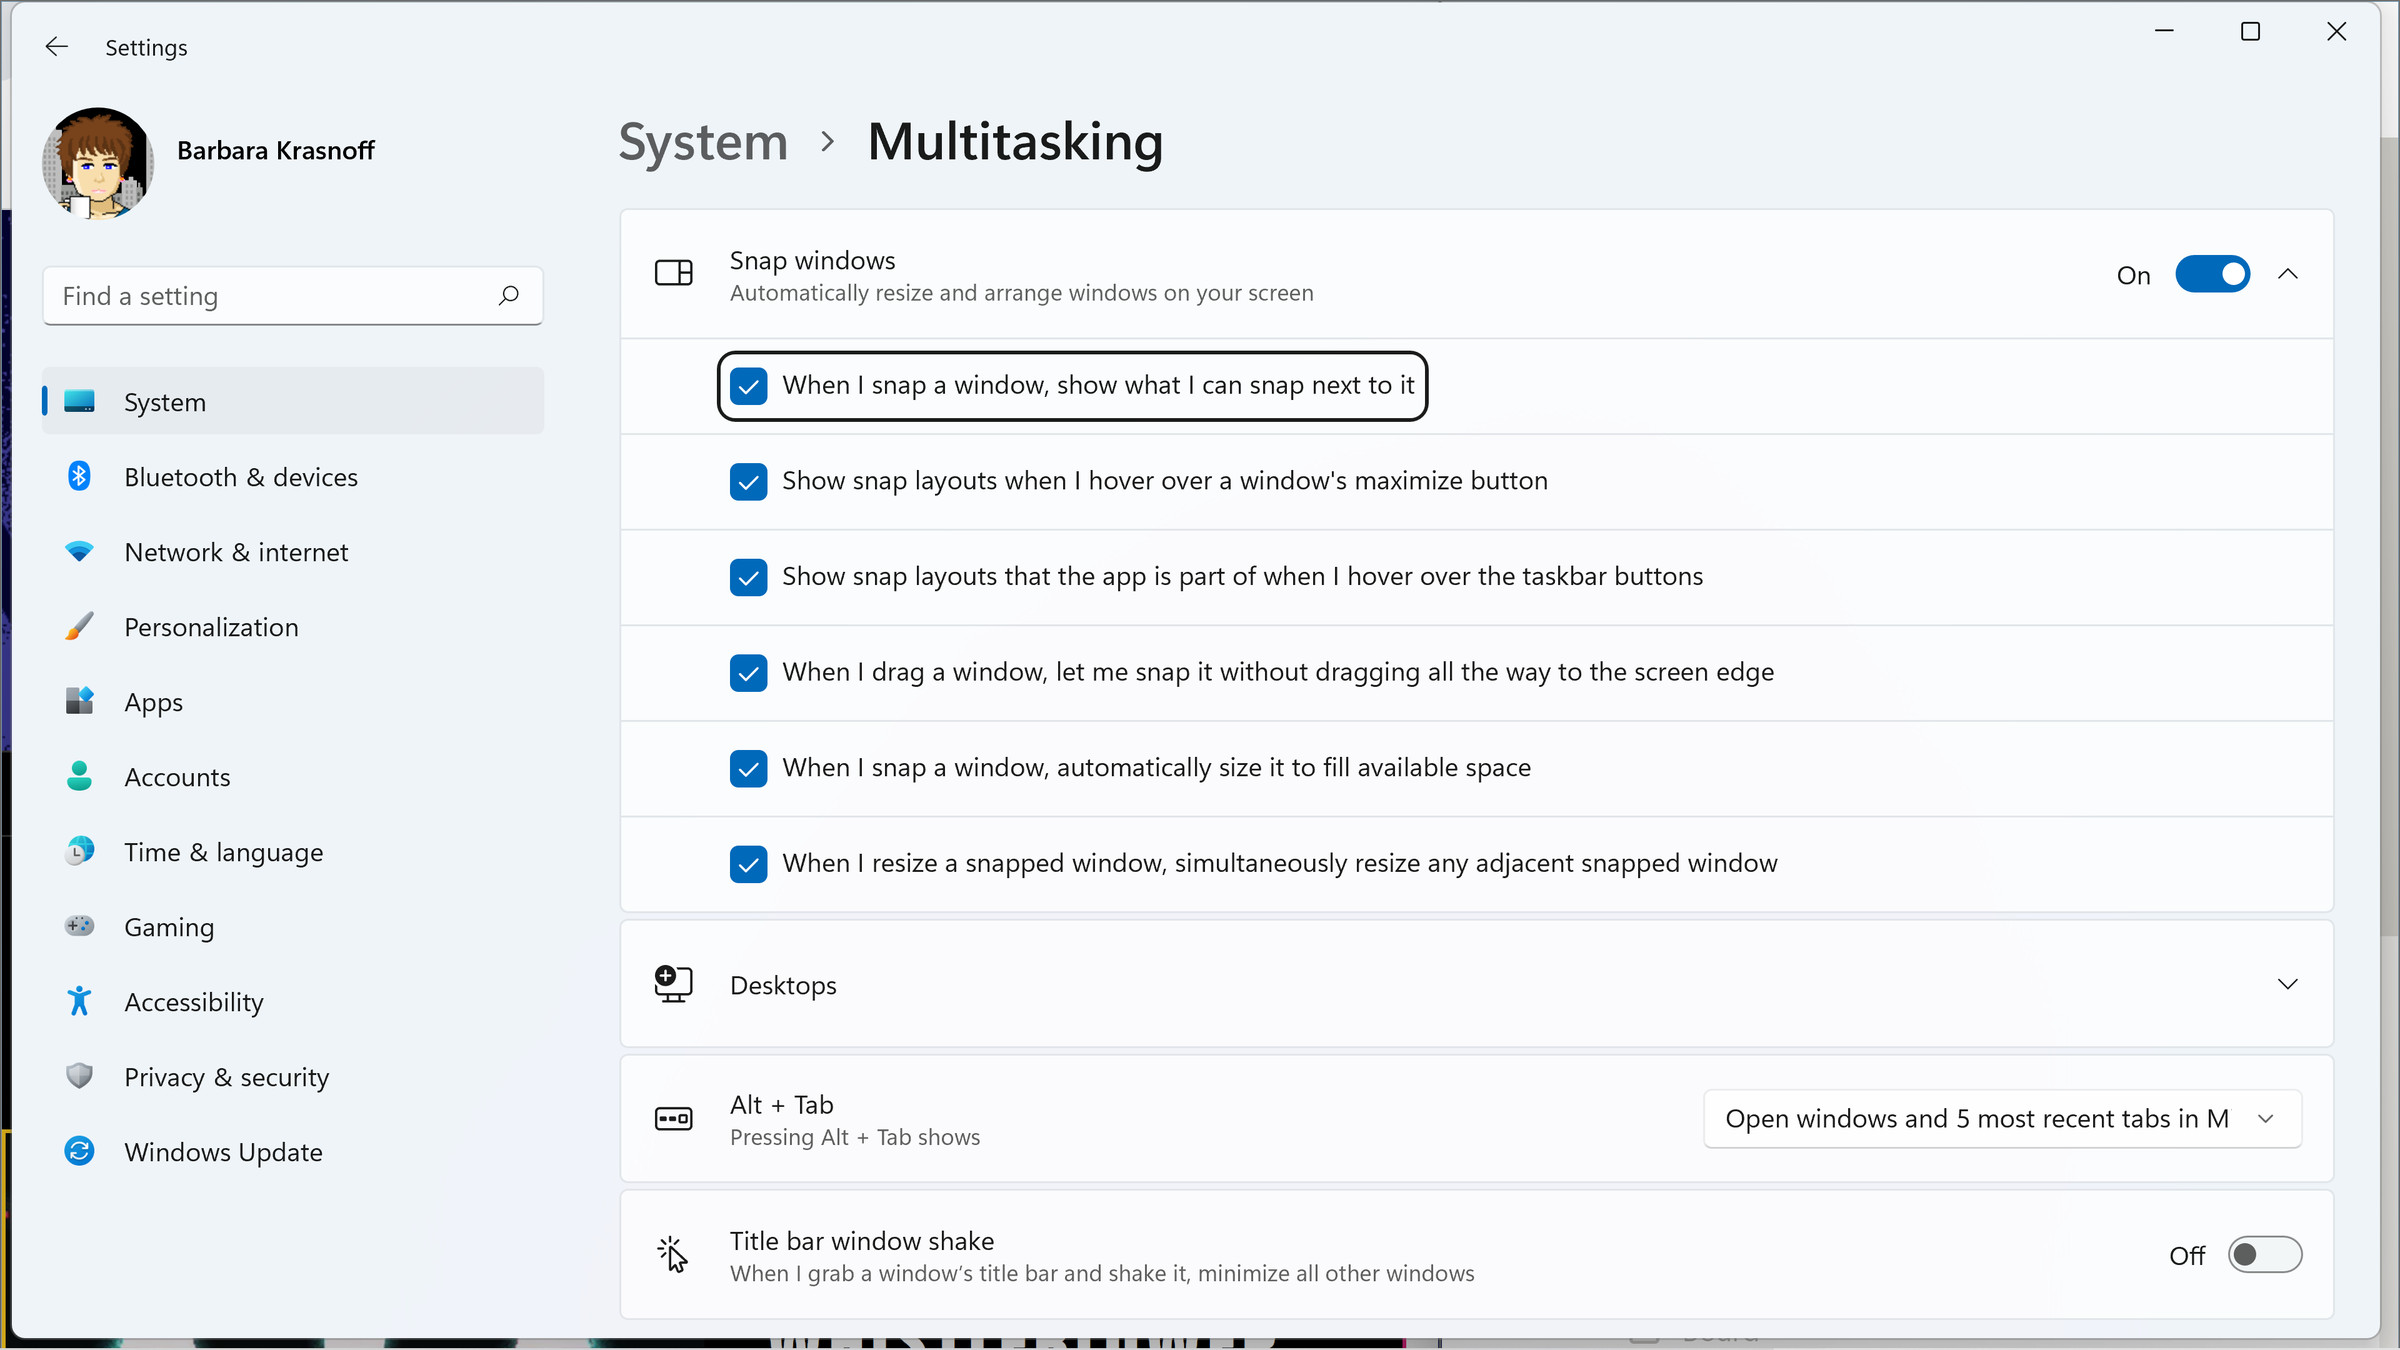 Go to the multitasking section in your setup to tweak your snap layout features.